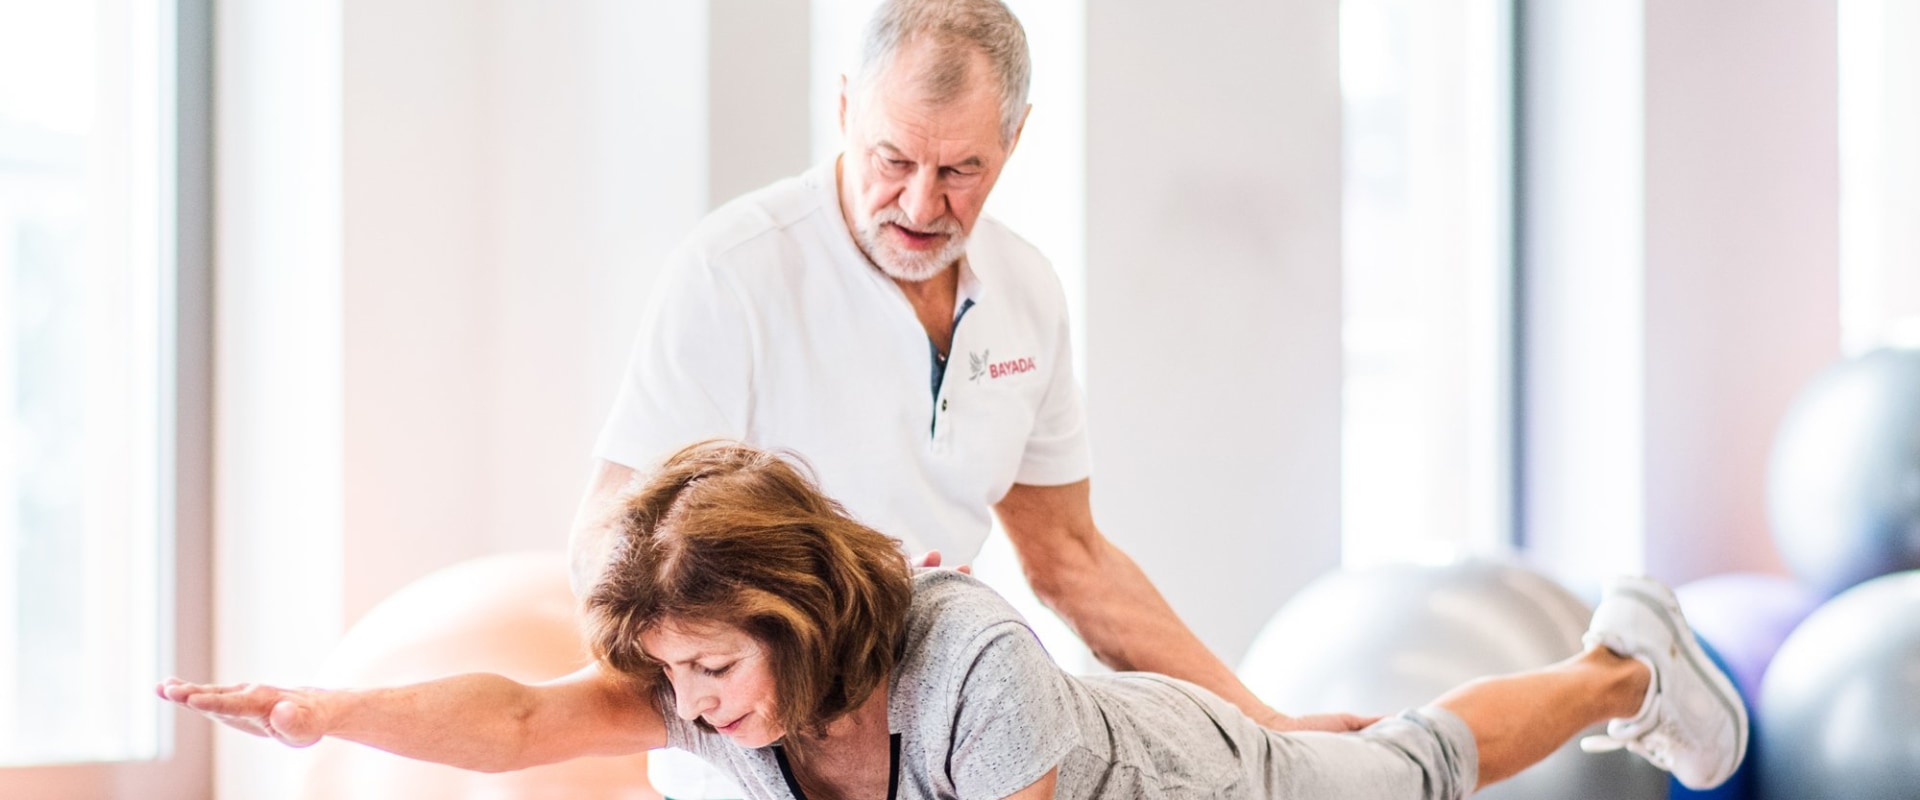 How Often Should You Have Physical Therapy Sessions?